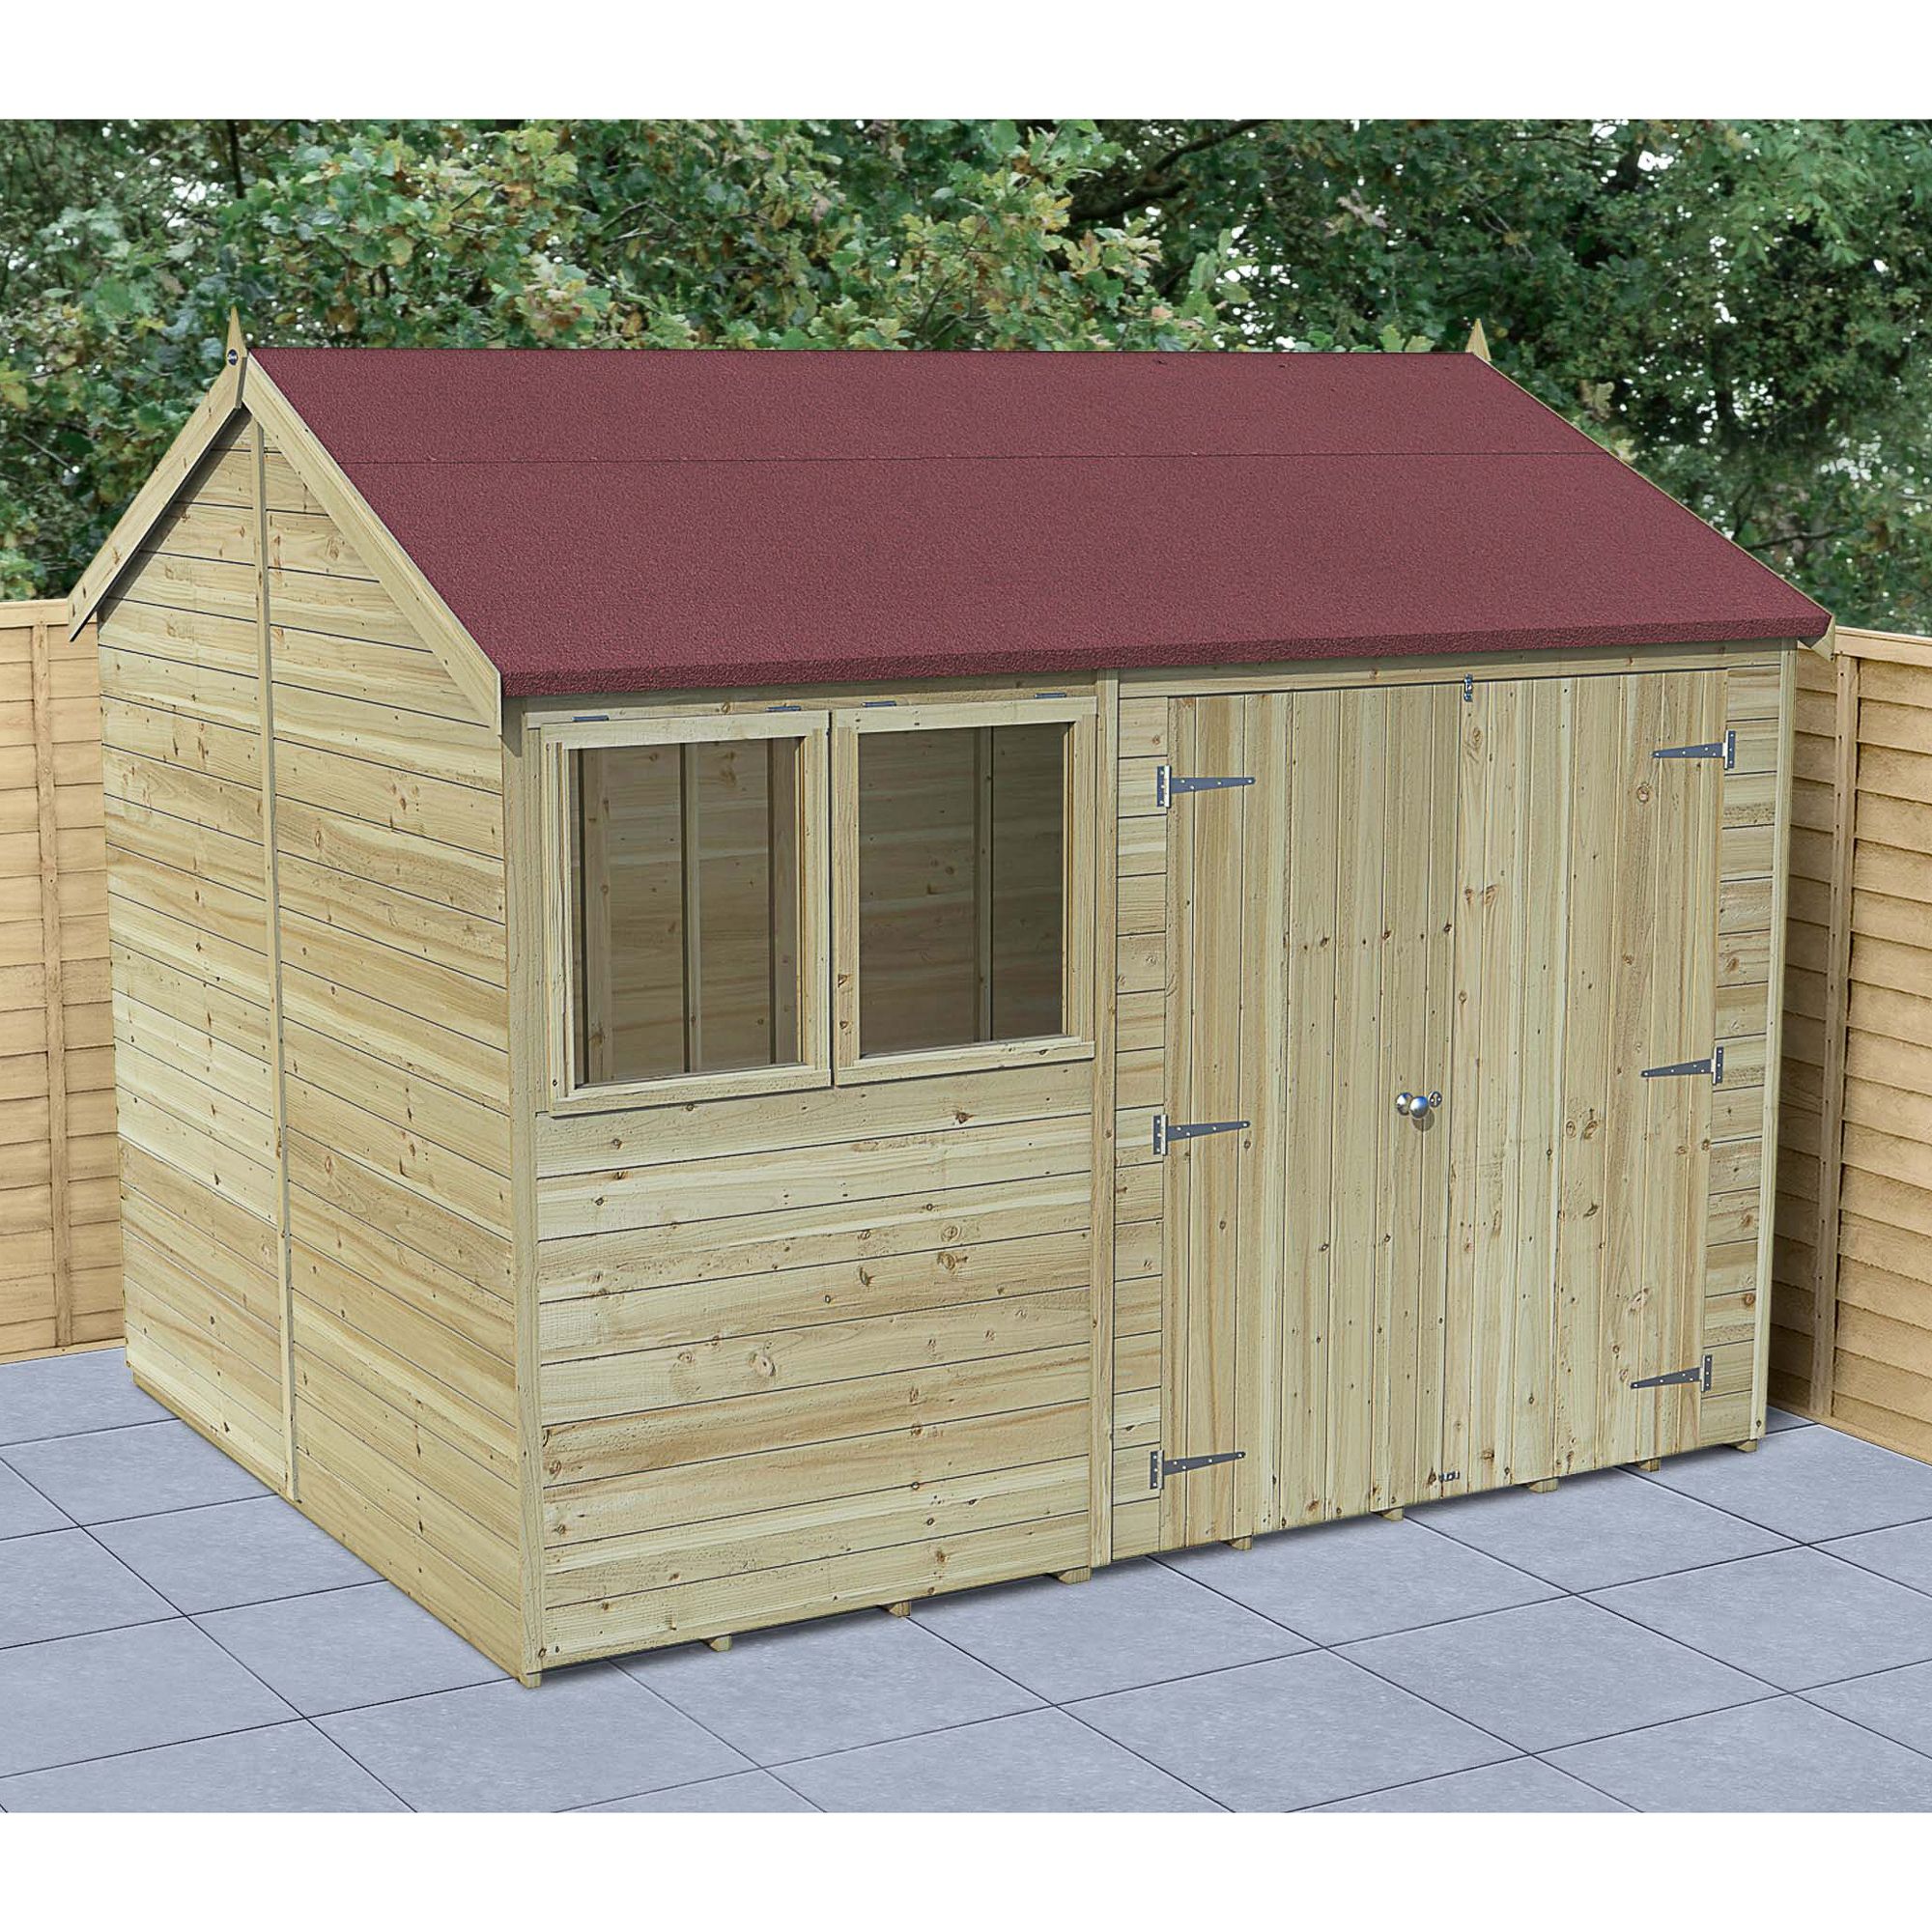 Forest Garden Timberdale 10X8 Ft Reverse Apex Tongue & Groove Wooden Shed With Floor